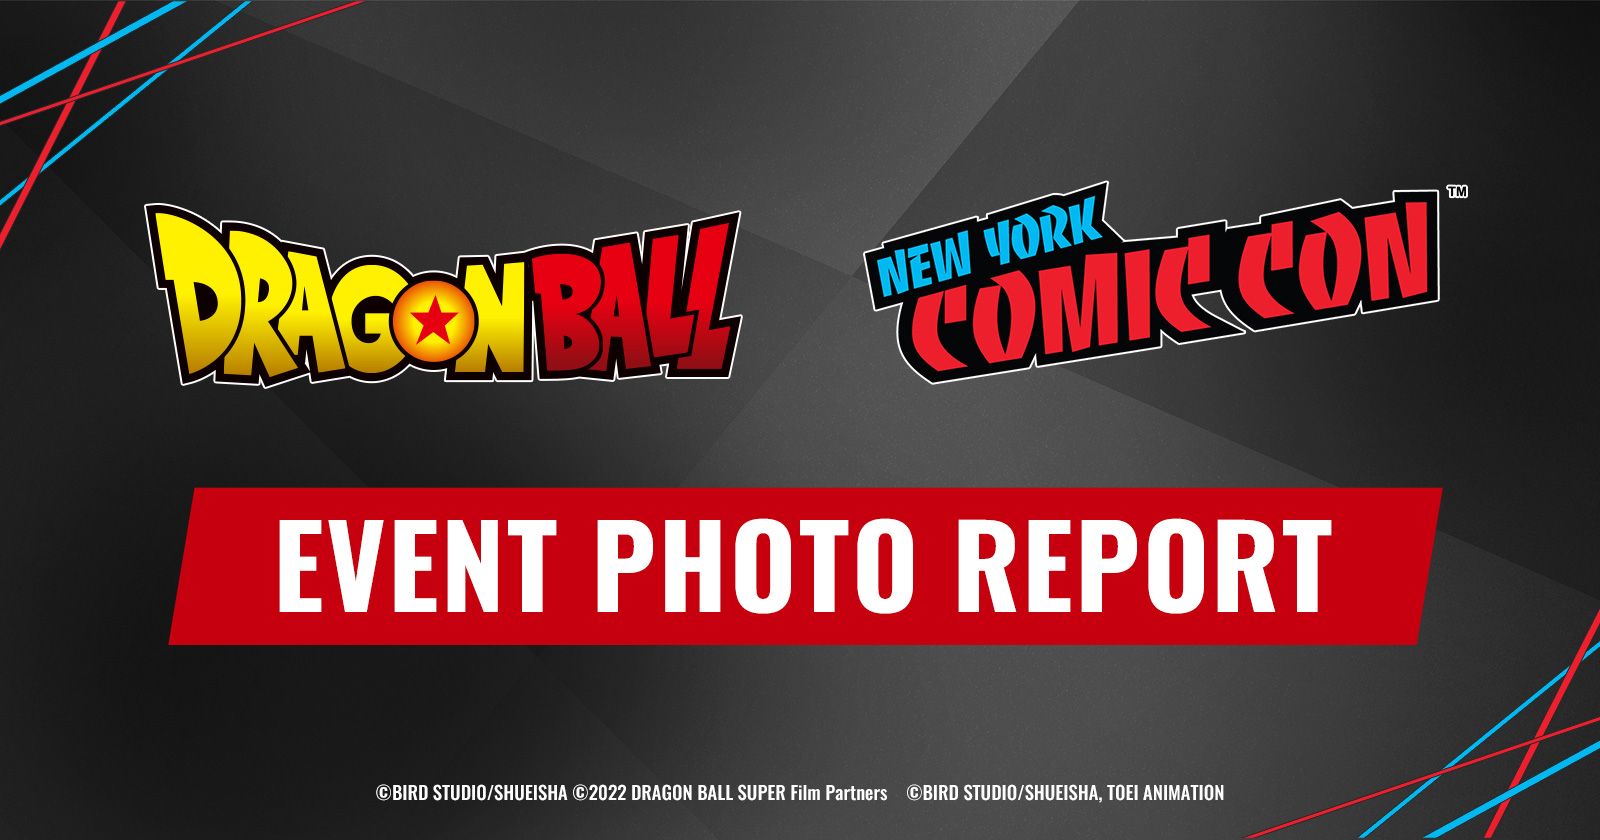 NYCC　REPORT